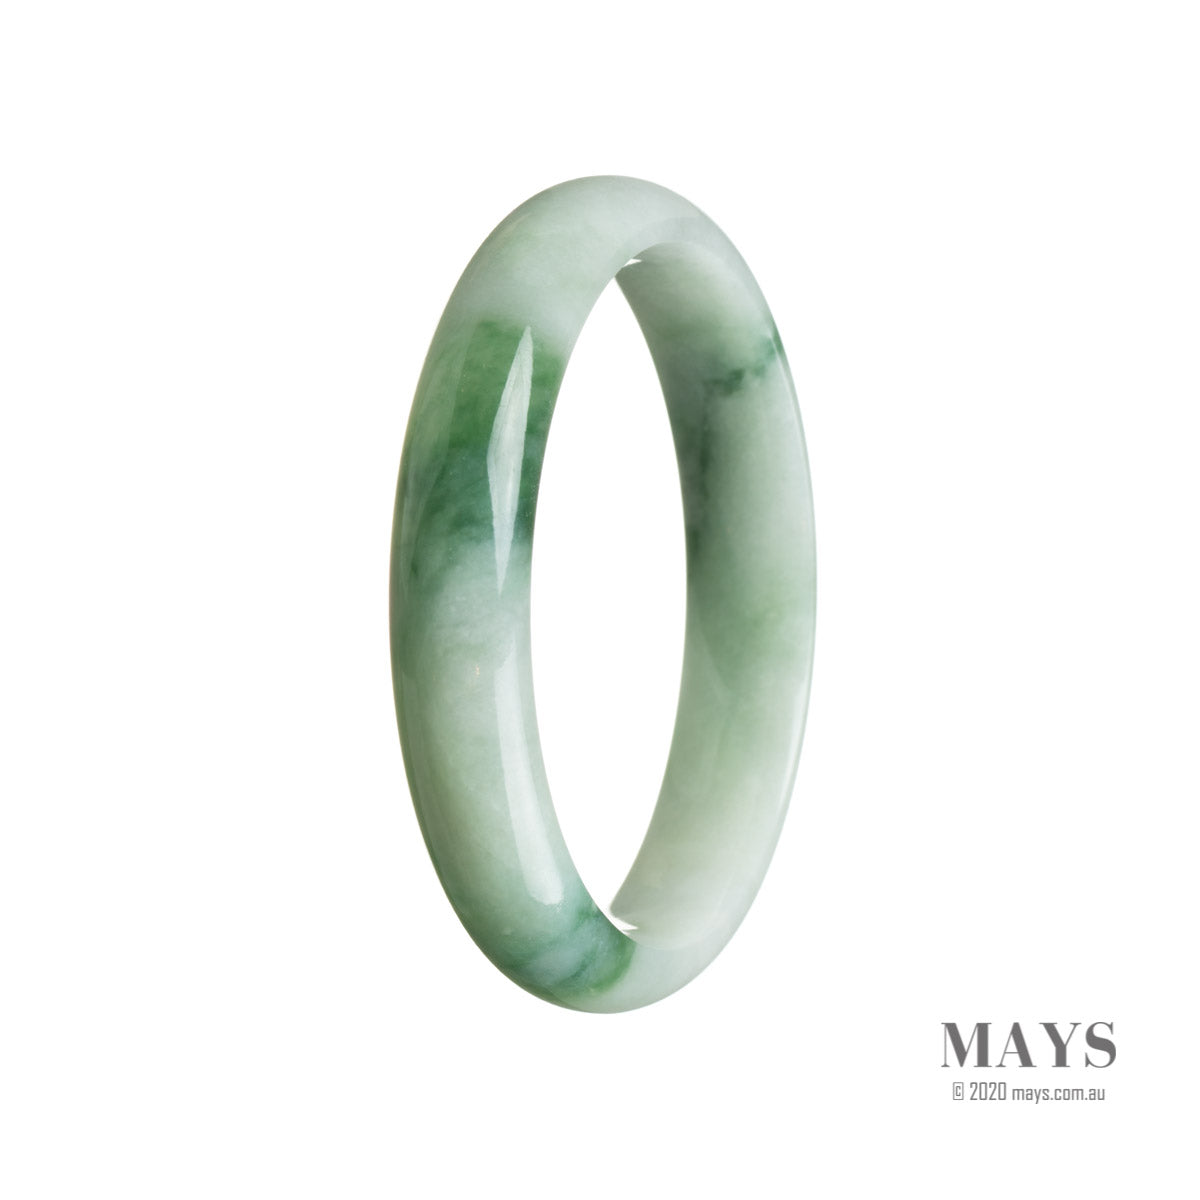 A beautiful green jade bangle bracelet with a half moon design, made of genuine Grade A jade. Perfect for adding a touch of traditional elegance to any outfit.